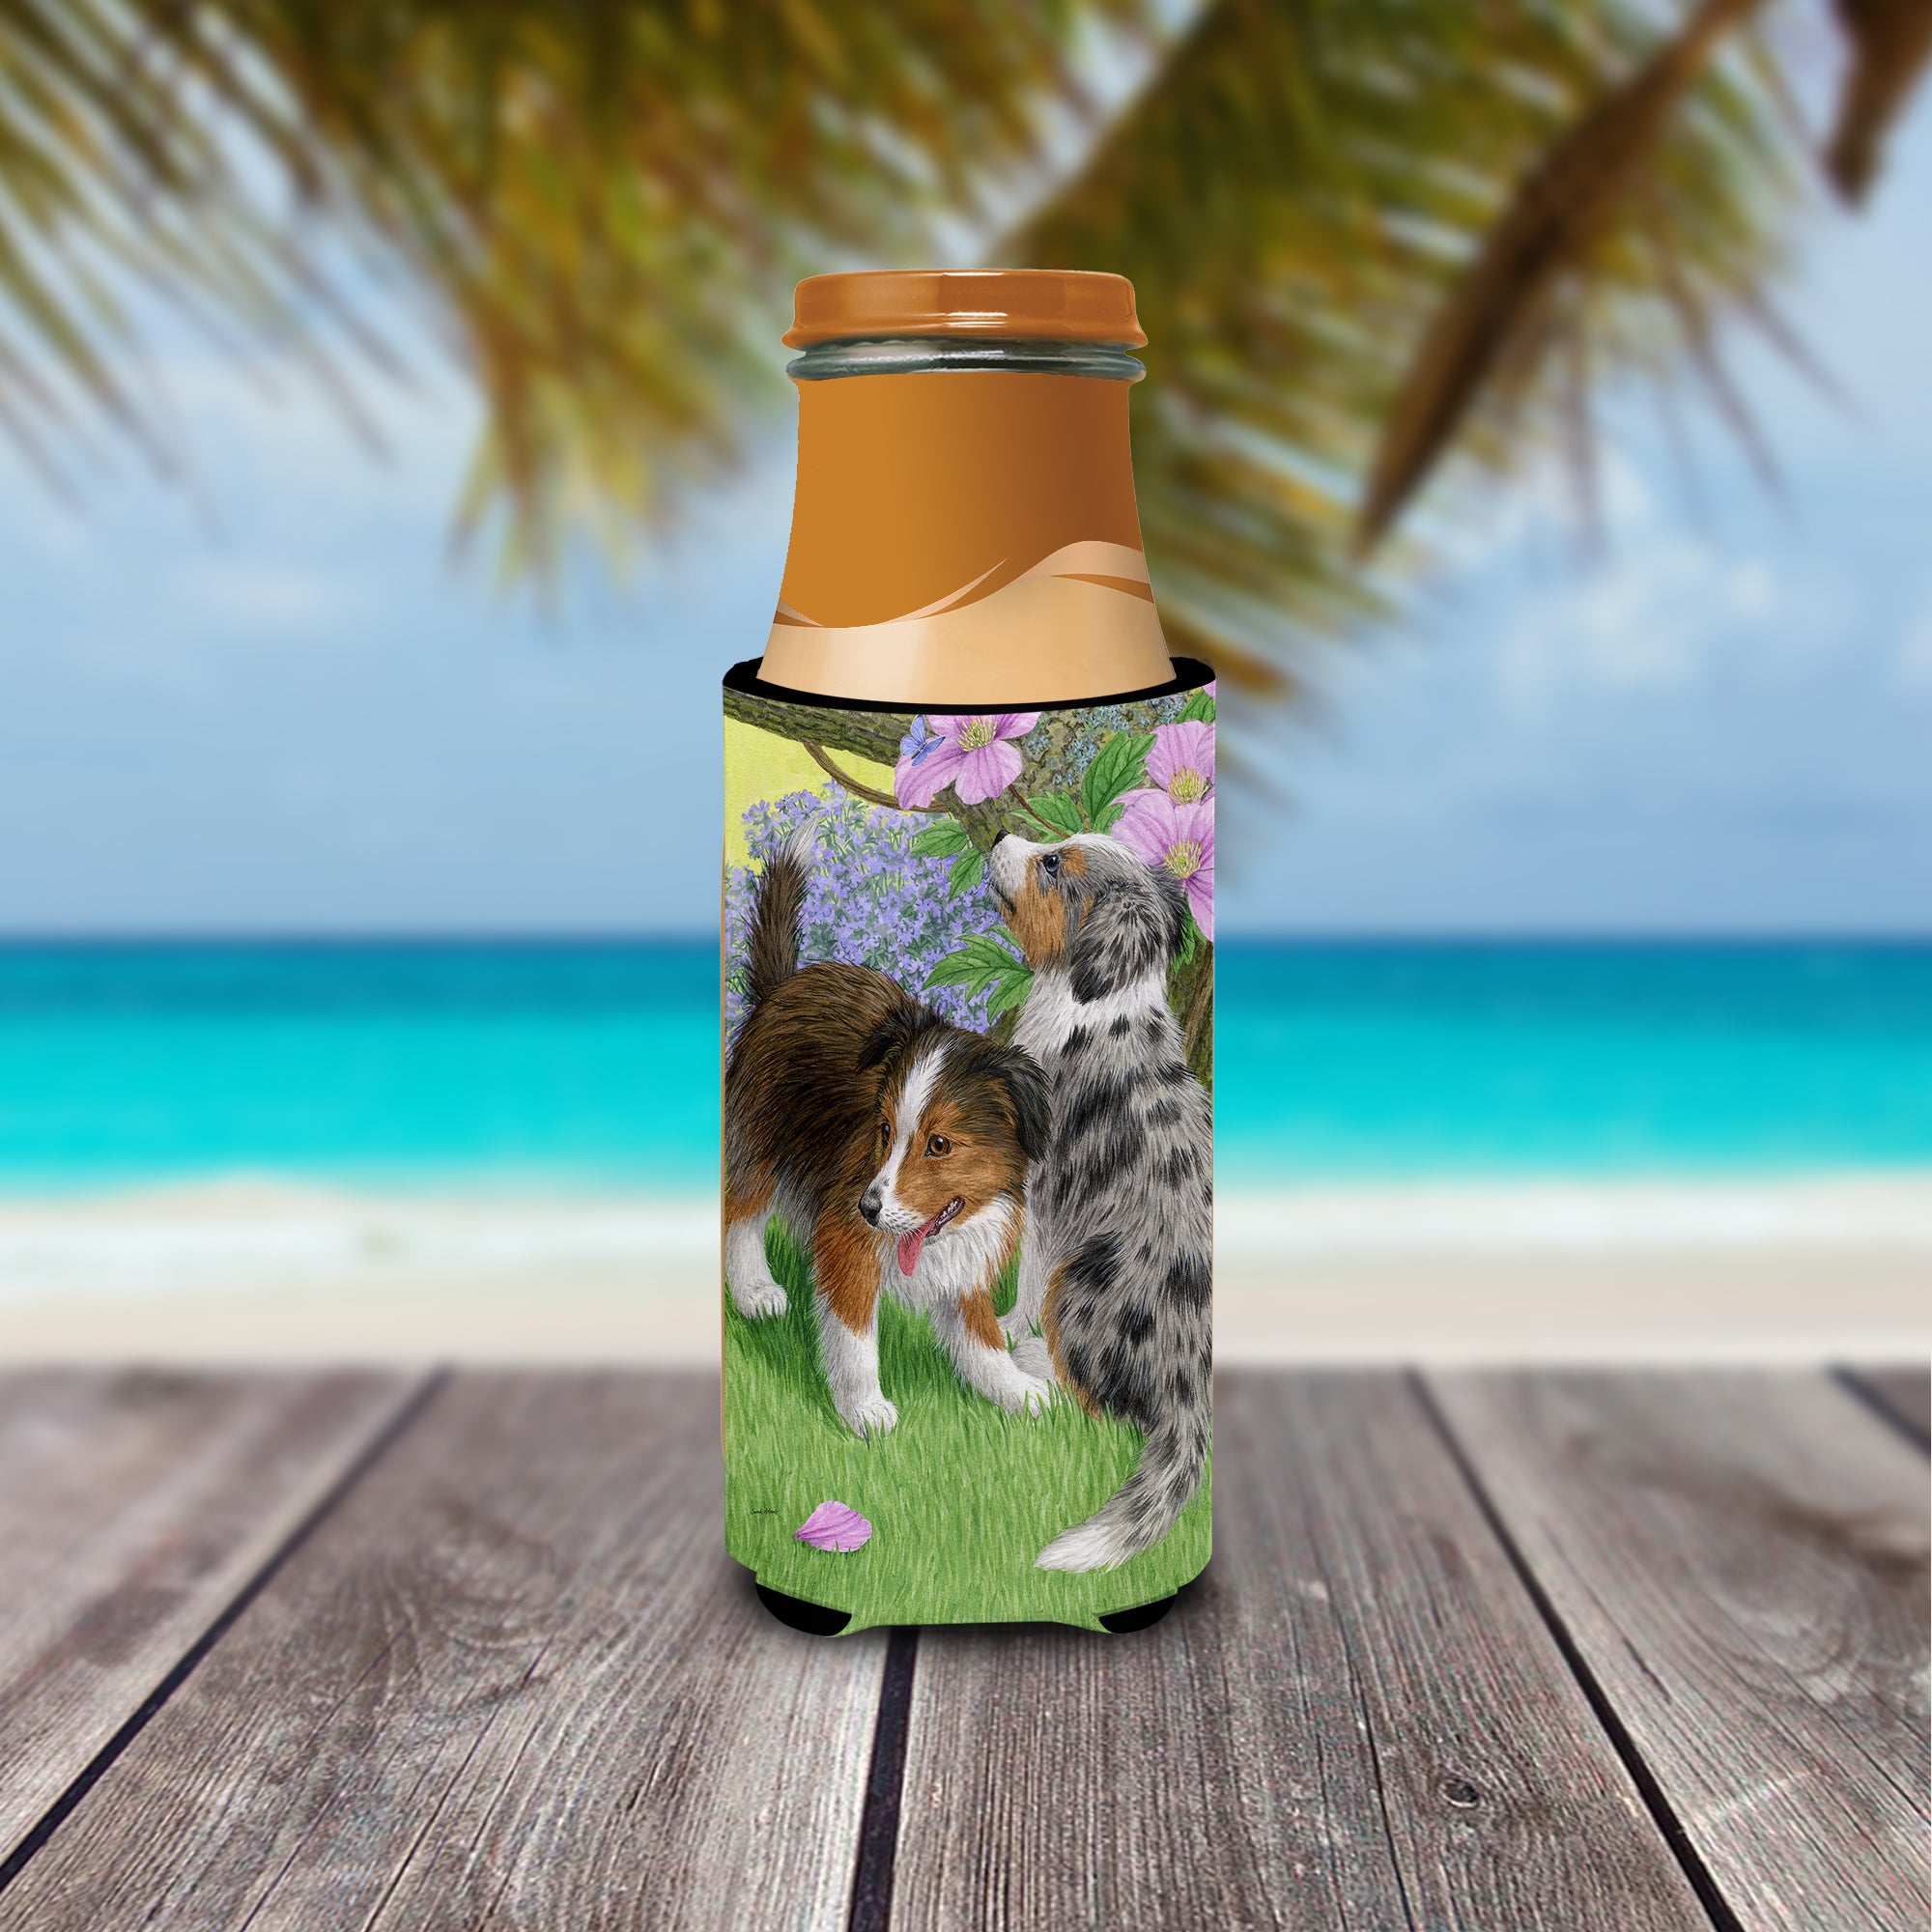 Sheltie Puppies Ultra Beverage Insulators for slim cans ASA2166MUK  the-store.com.